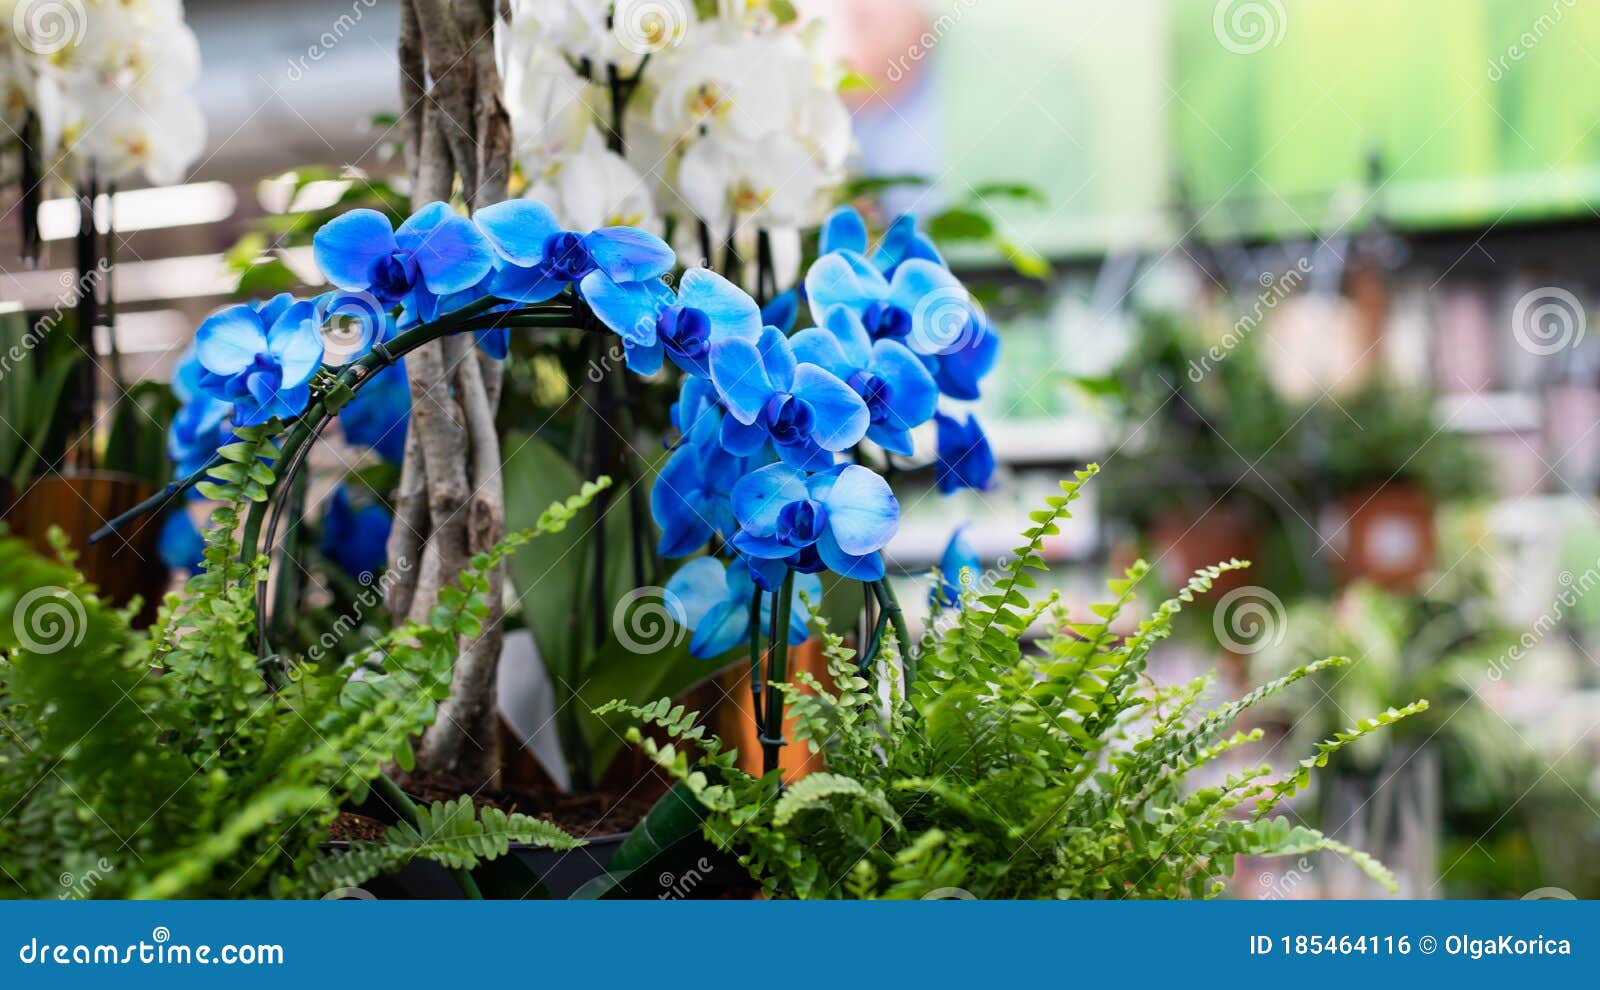 Blue Flower Orchid Blossom Royal Blue Phalaenopsis. Natural Branch of a  Blossoming Orchid, Selection and Chemical Coloring of Stock Photo - Image  of retail, petals: 185464116